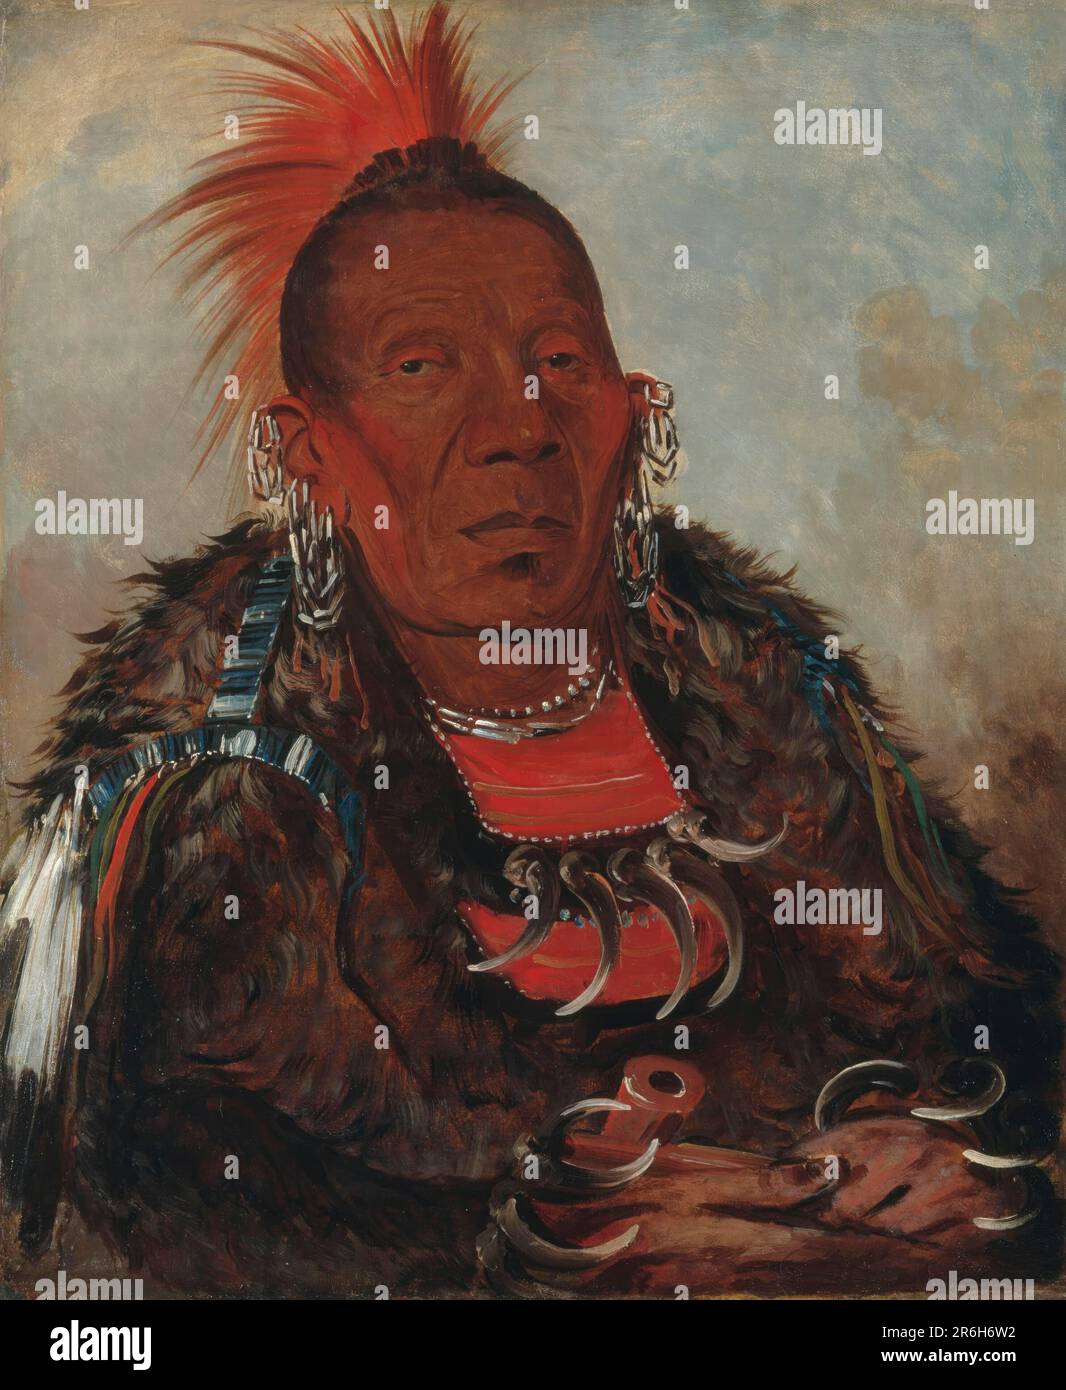 Wah-ro-née-sah, The Surrounder, Chief of the Tribe. oil on canvas. Date: 1832. Museum: Smithsonian American Art Museum. Stock Photo